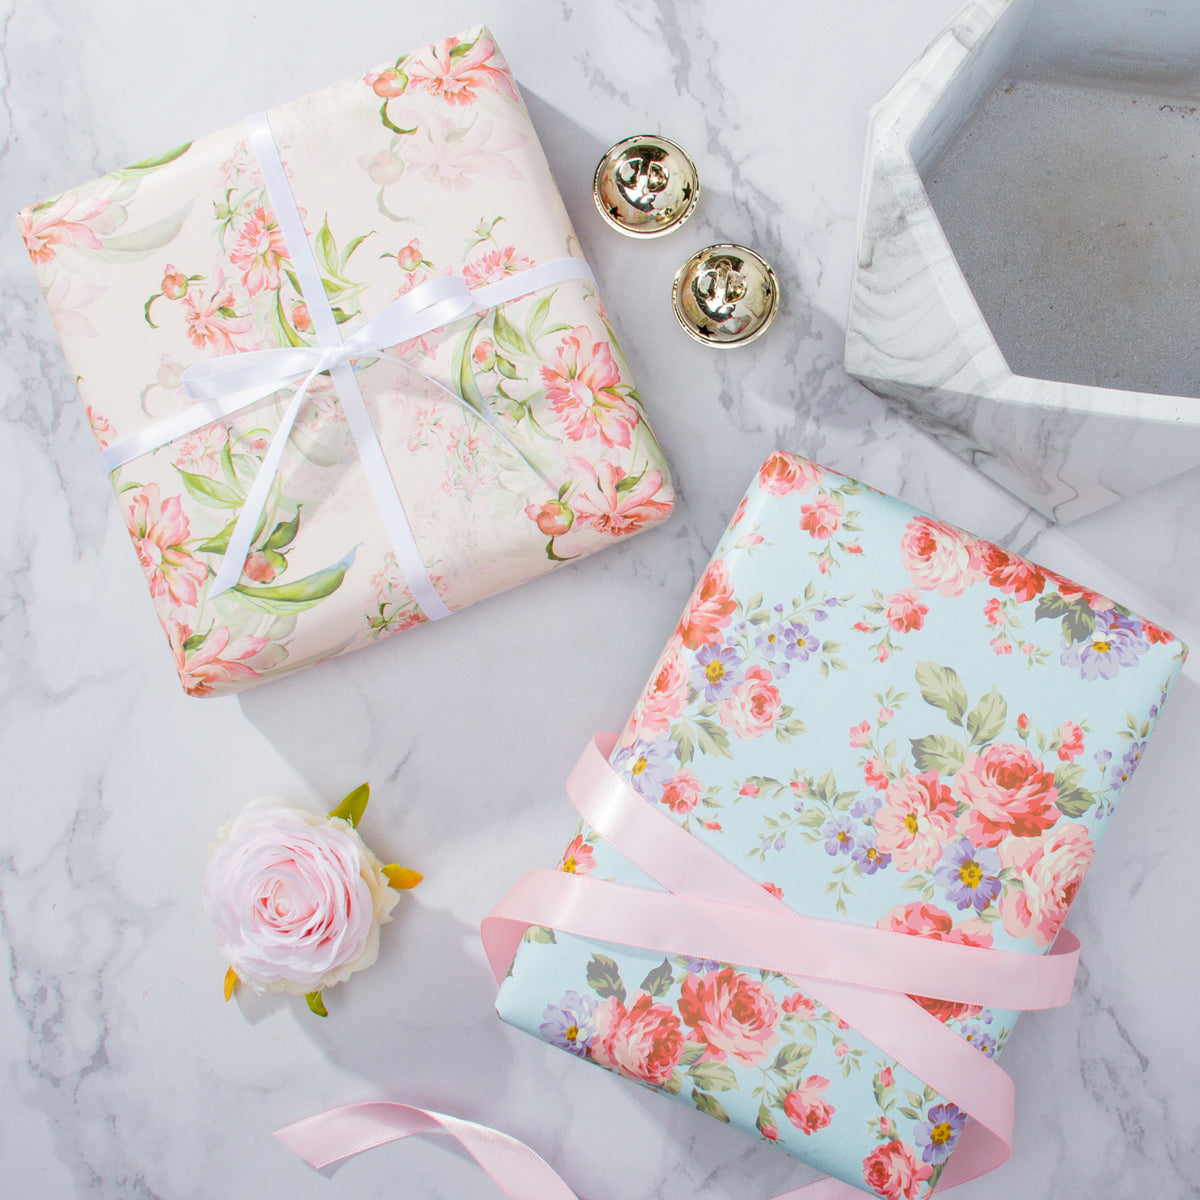 Wrapping Paper - Floral Design Paper Sheets